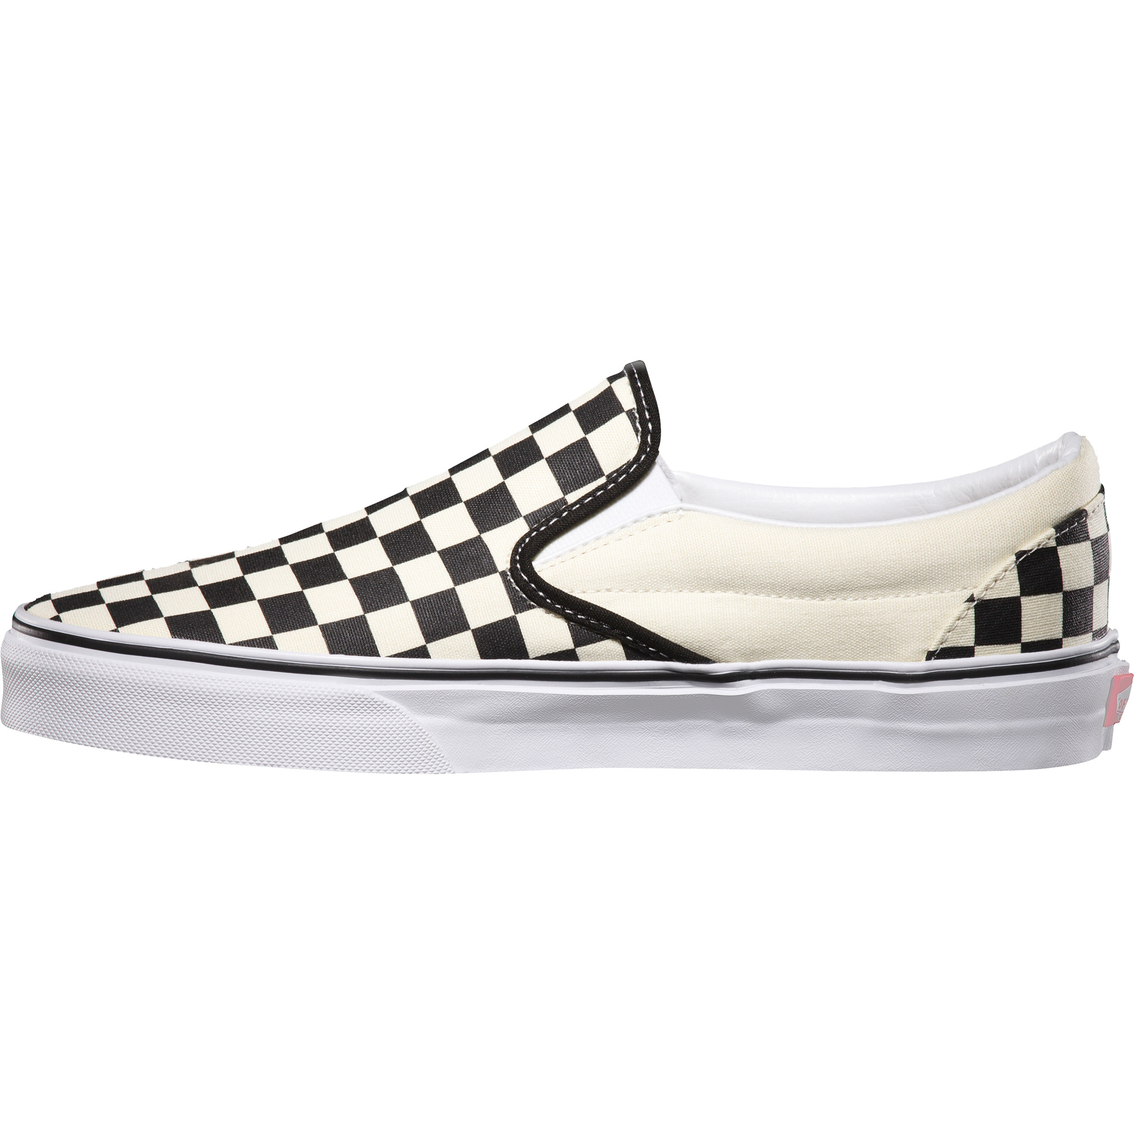 Vans Women's Classic Checkerboard Slip On Shoes | Sneakers | Shoes ...